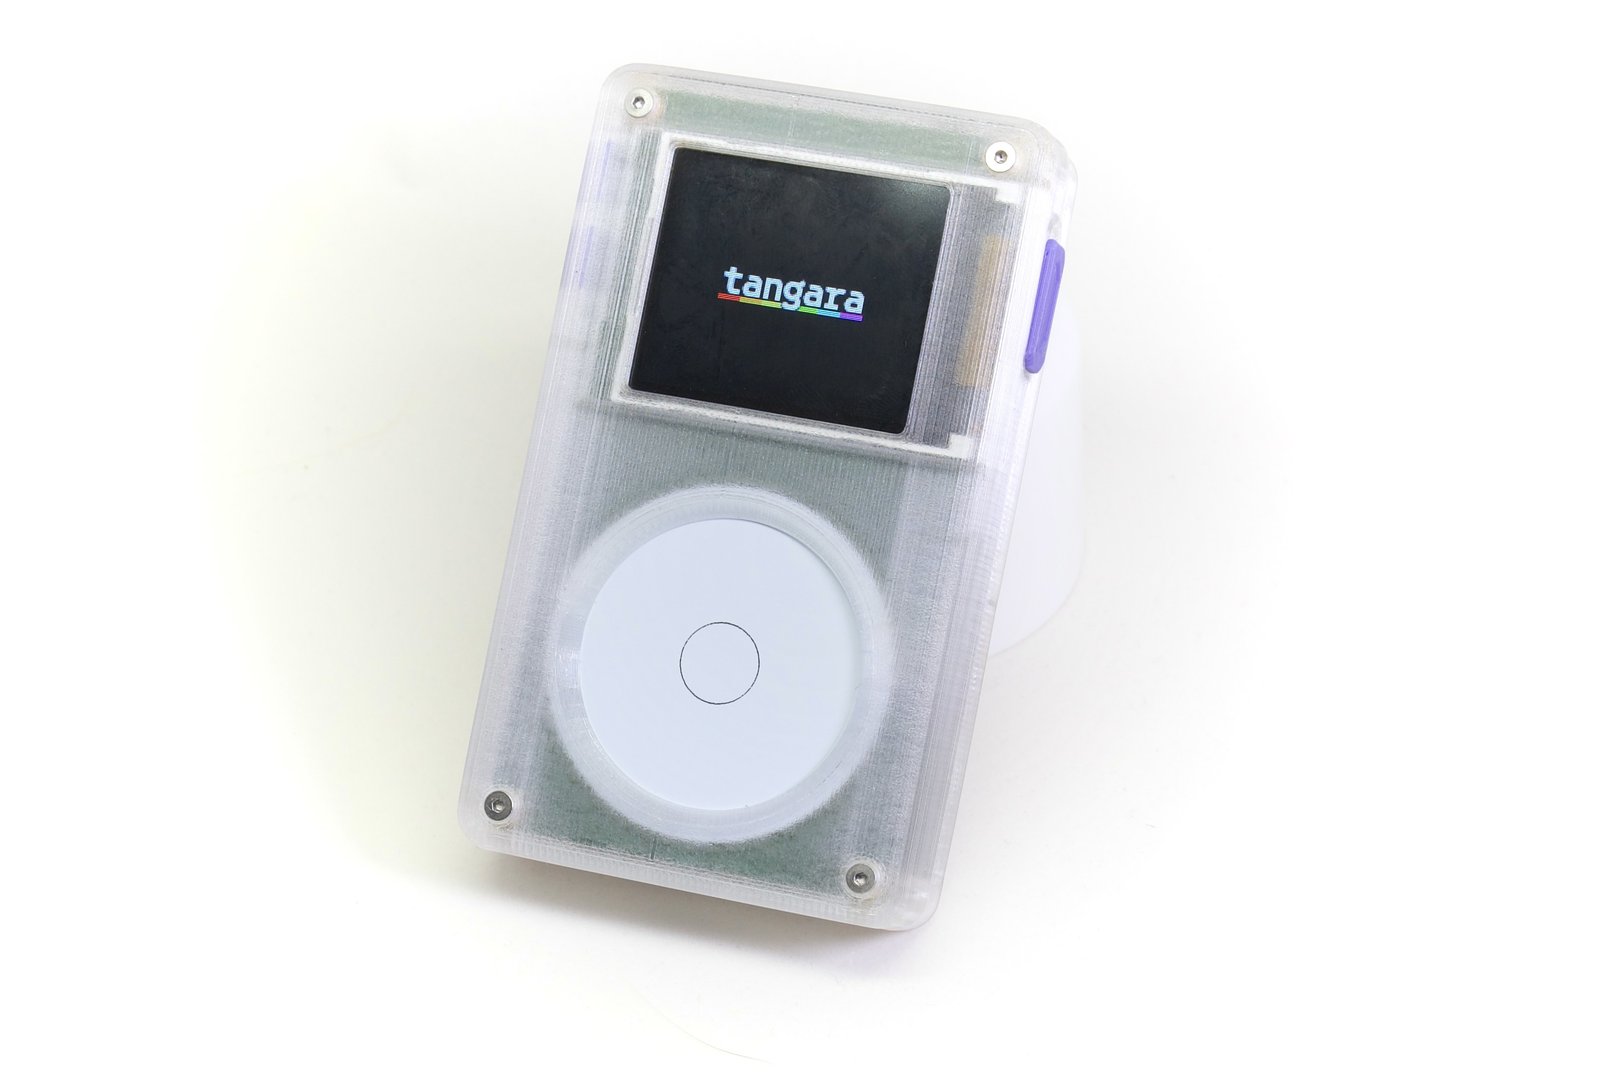 A Tangara, in a 3D-printed translucent case with purple features and a white touchwheel. It's showing the Tangara logo as it boots up (logotype with a rainbow underline).